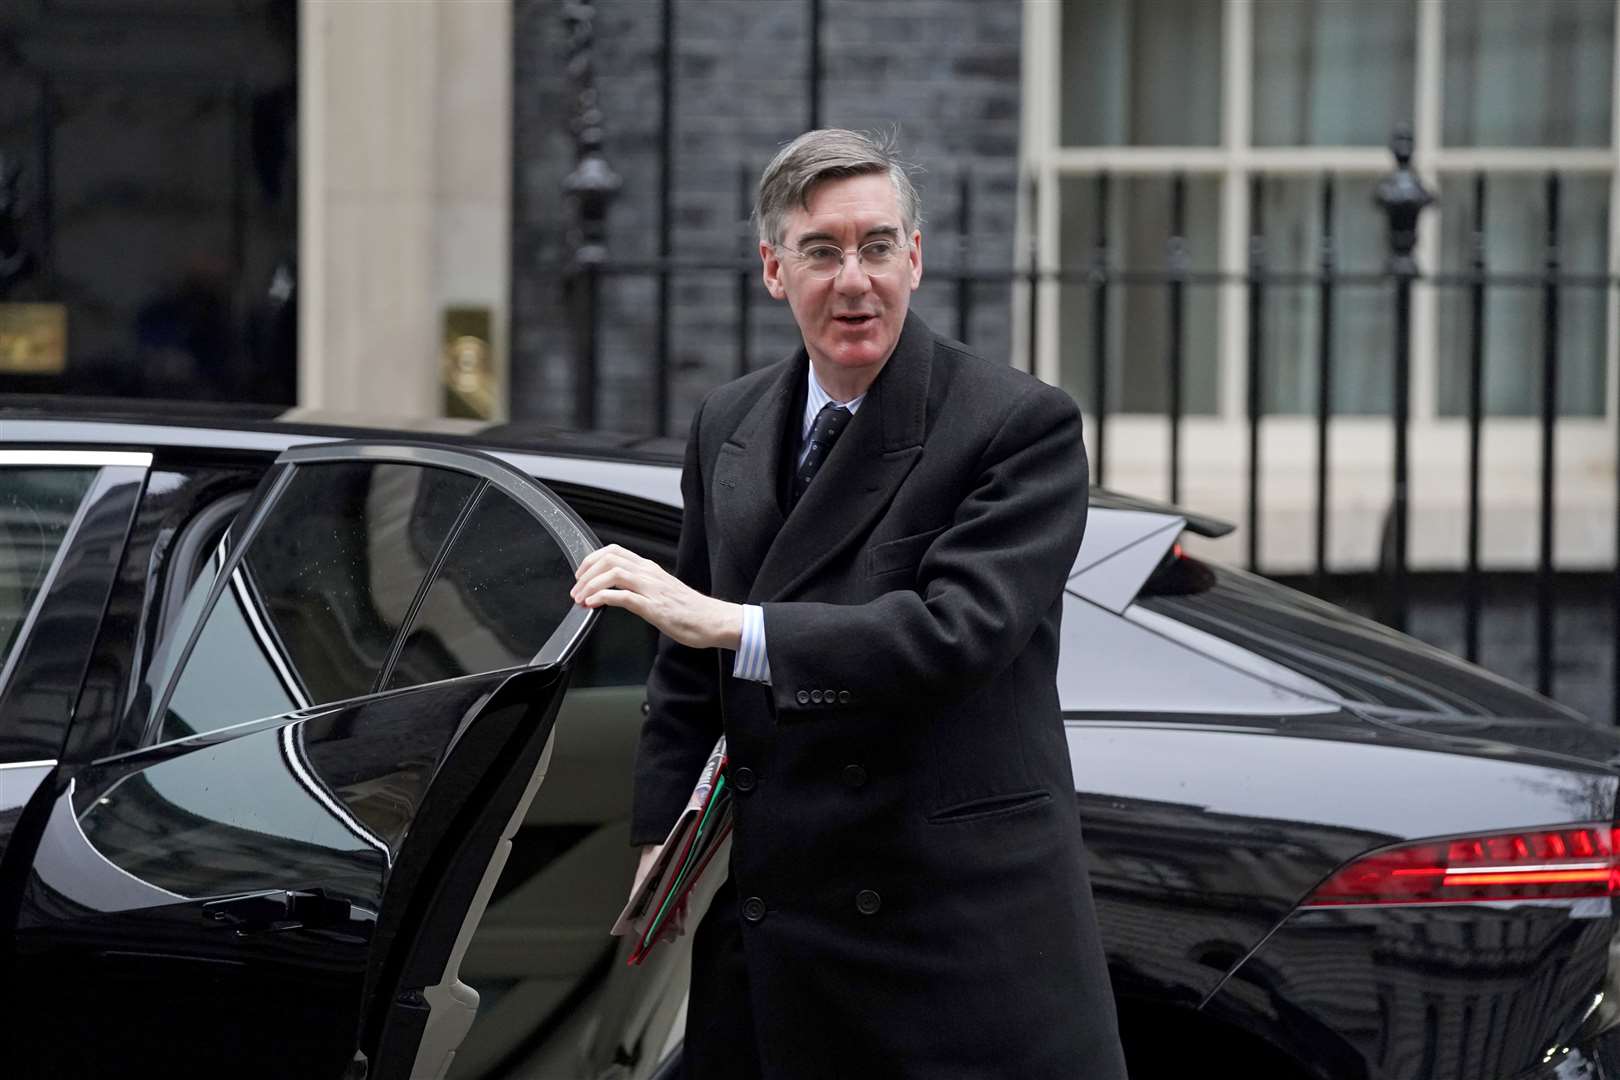 Jacob Rees-Mogg suggested any attempt to remove Mr Johnson from Downing Street would lead to a general election (Stefan Rousseau/PA)